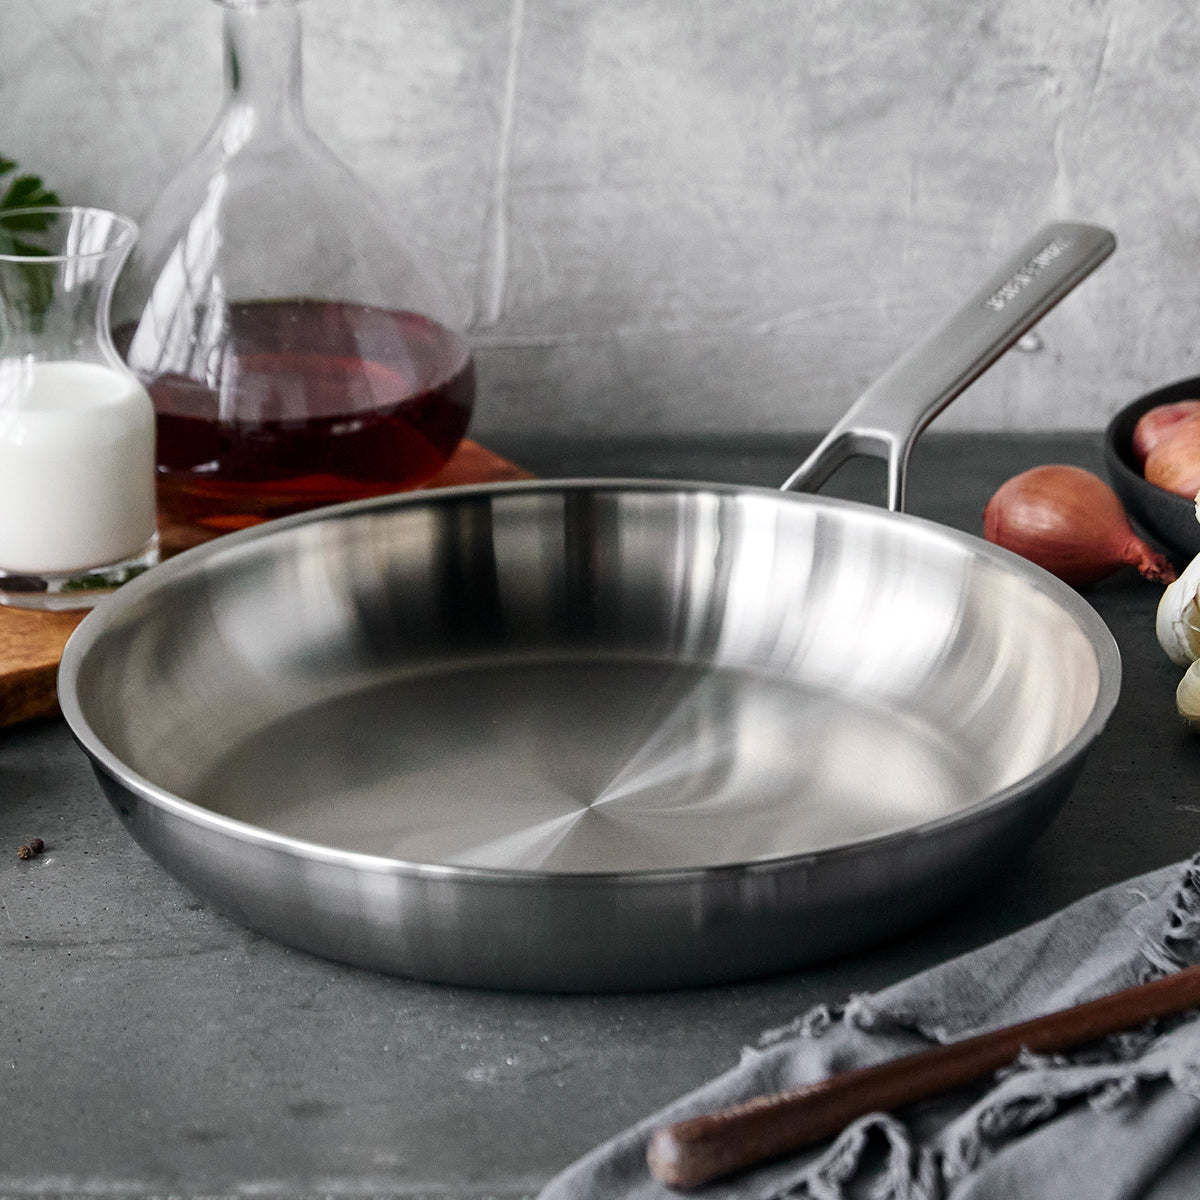 12 inch stainless steel frypan displayed on a dark gray surface next to a decanter, onions, and towel